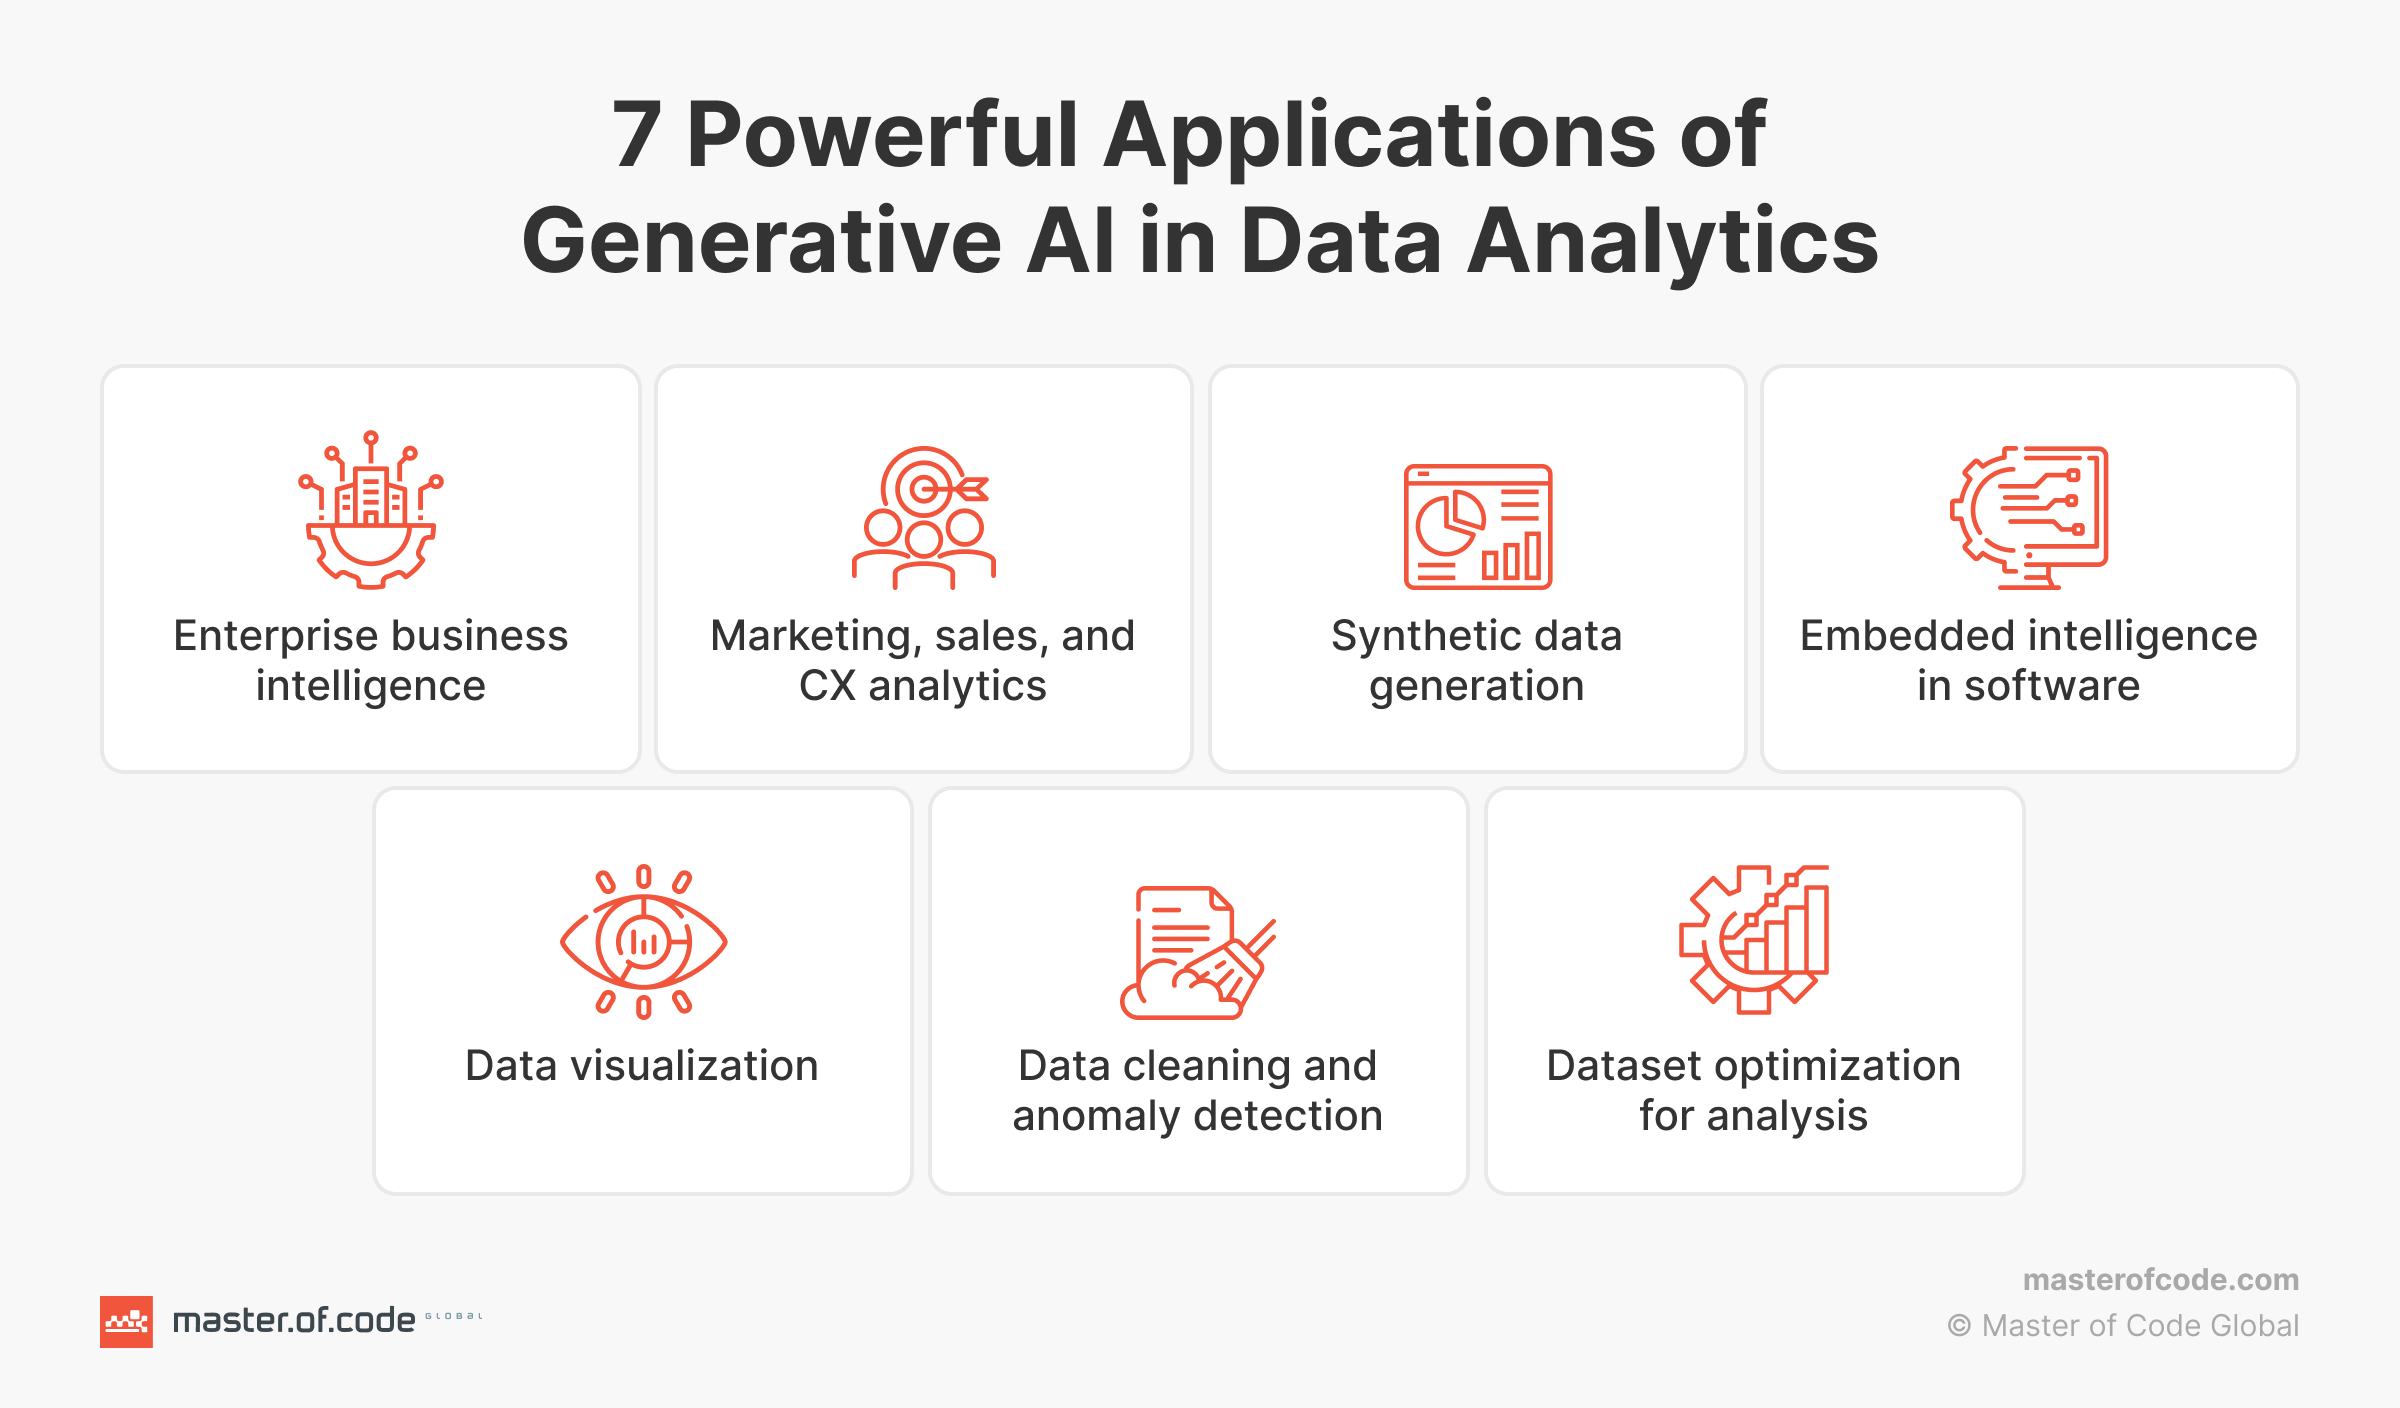 7 Powerful Applications of Gen AI in Data Analytics